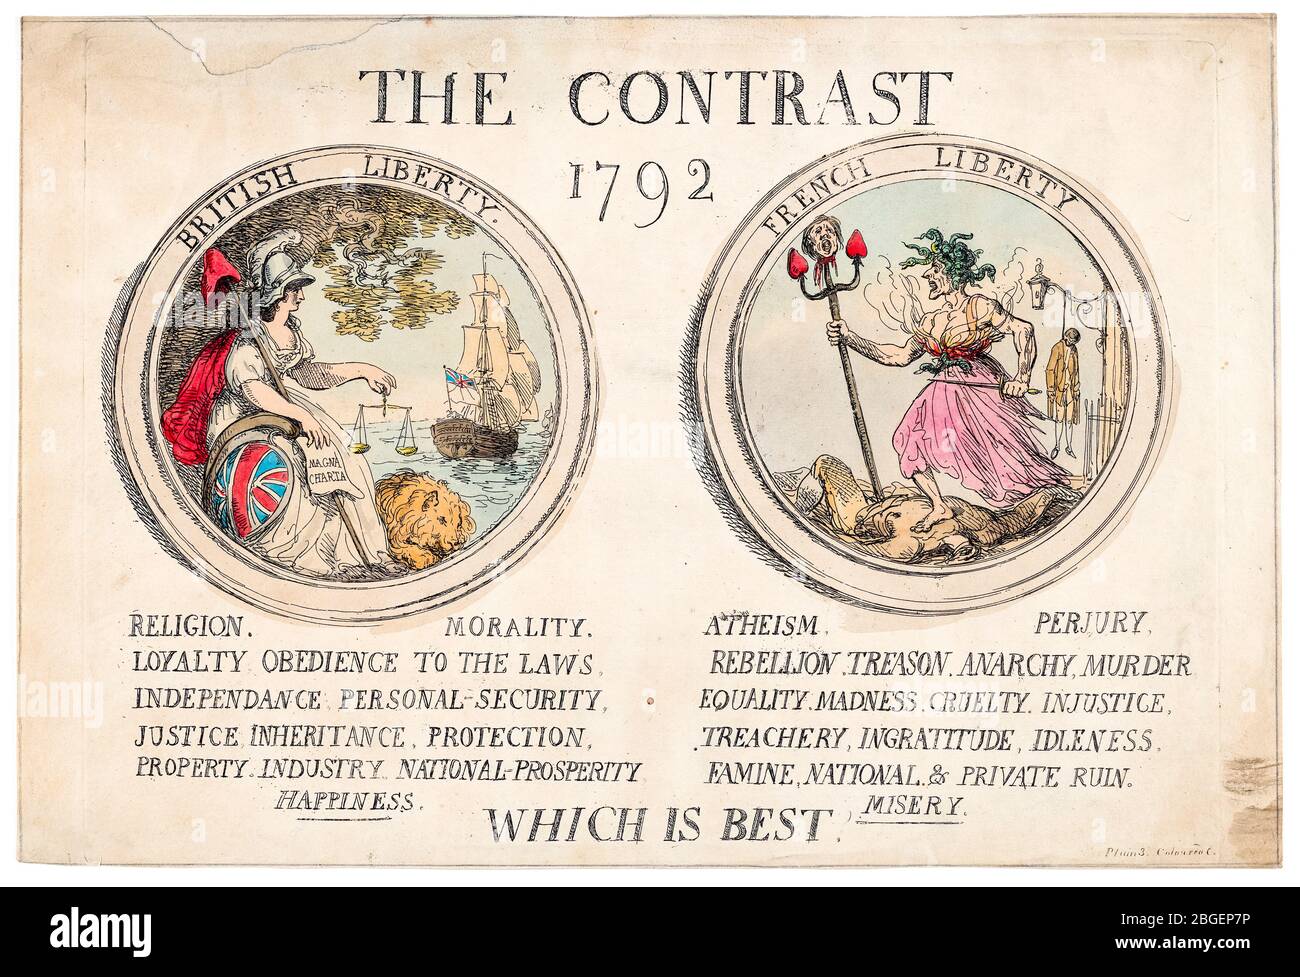 Thomas Rowlandson, The Contrast, (British Liberty versus French Liberty), etching, 1792 Stock Photo